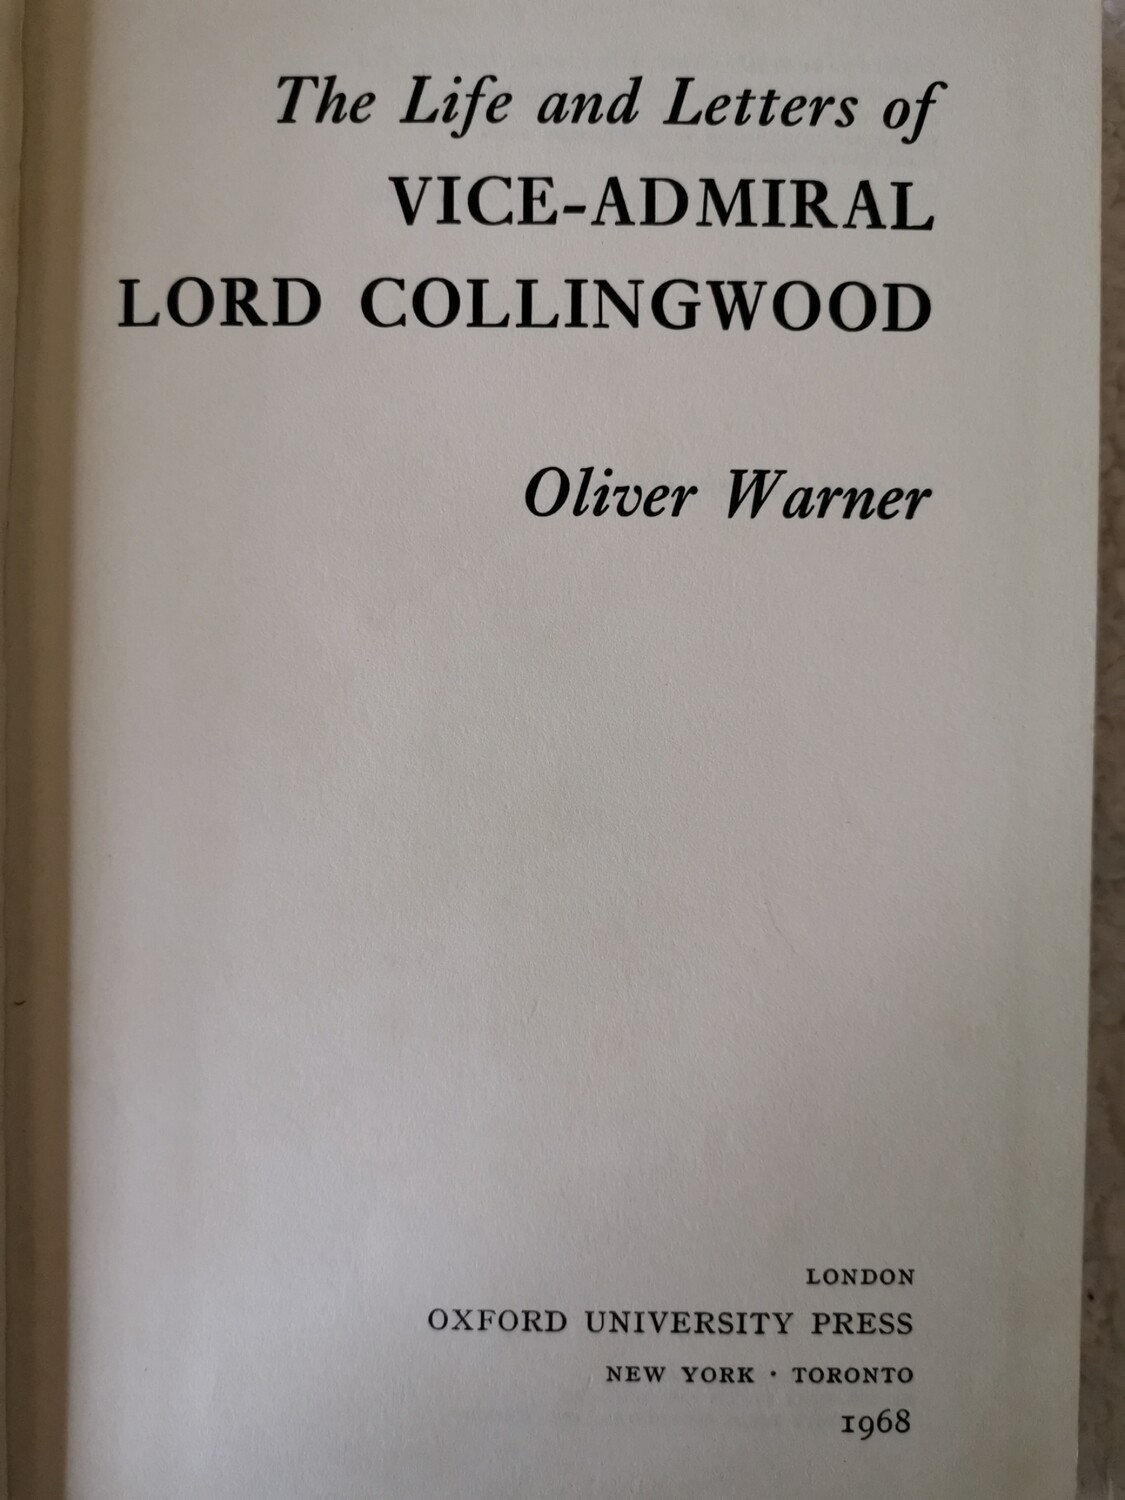 The life and letters of vice-admiral Lord Collingwood, Oliver Warner